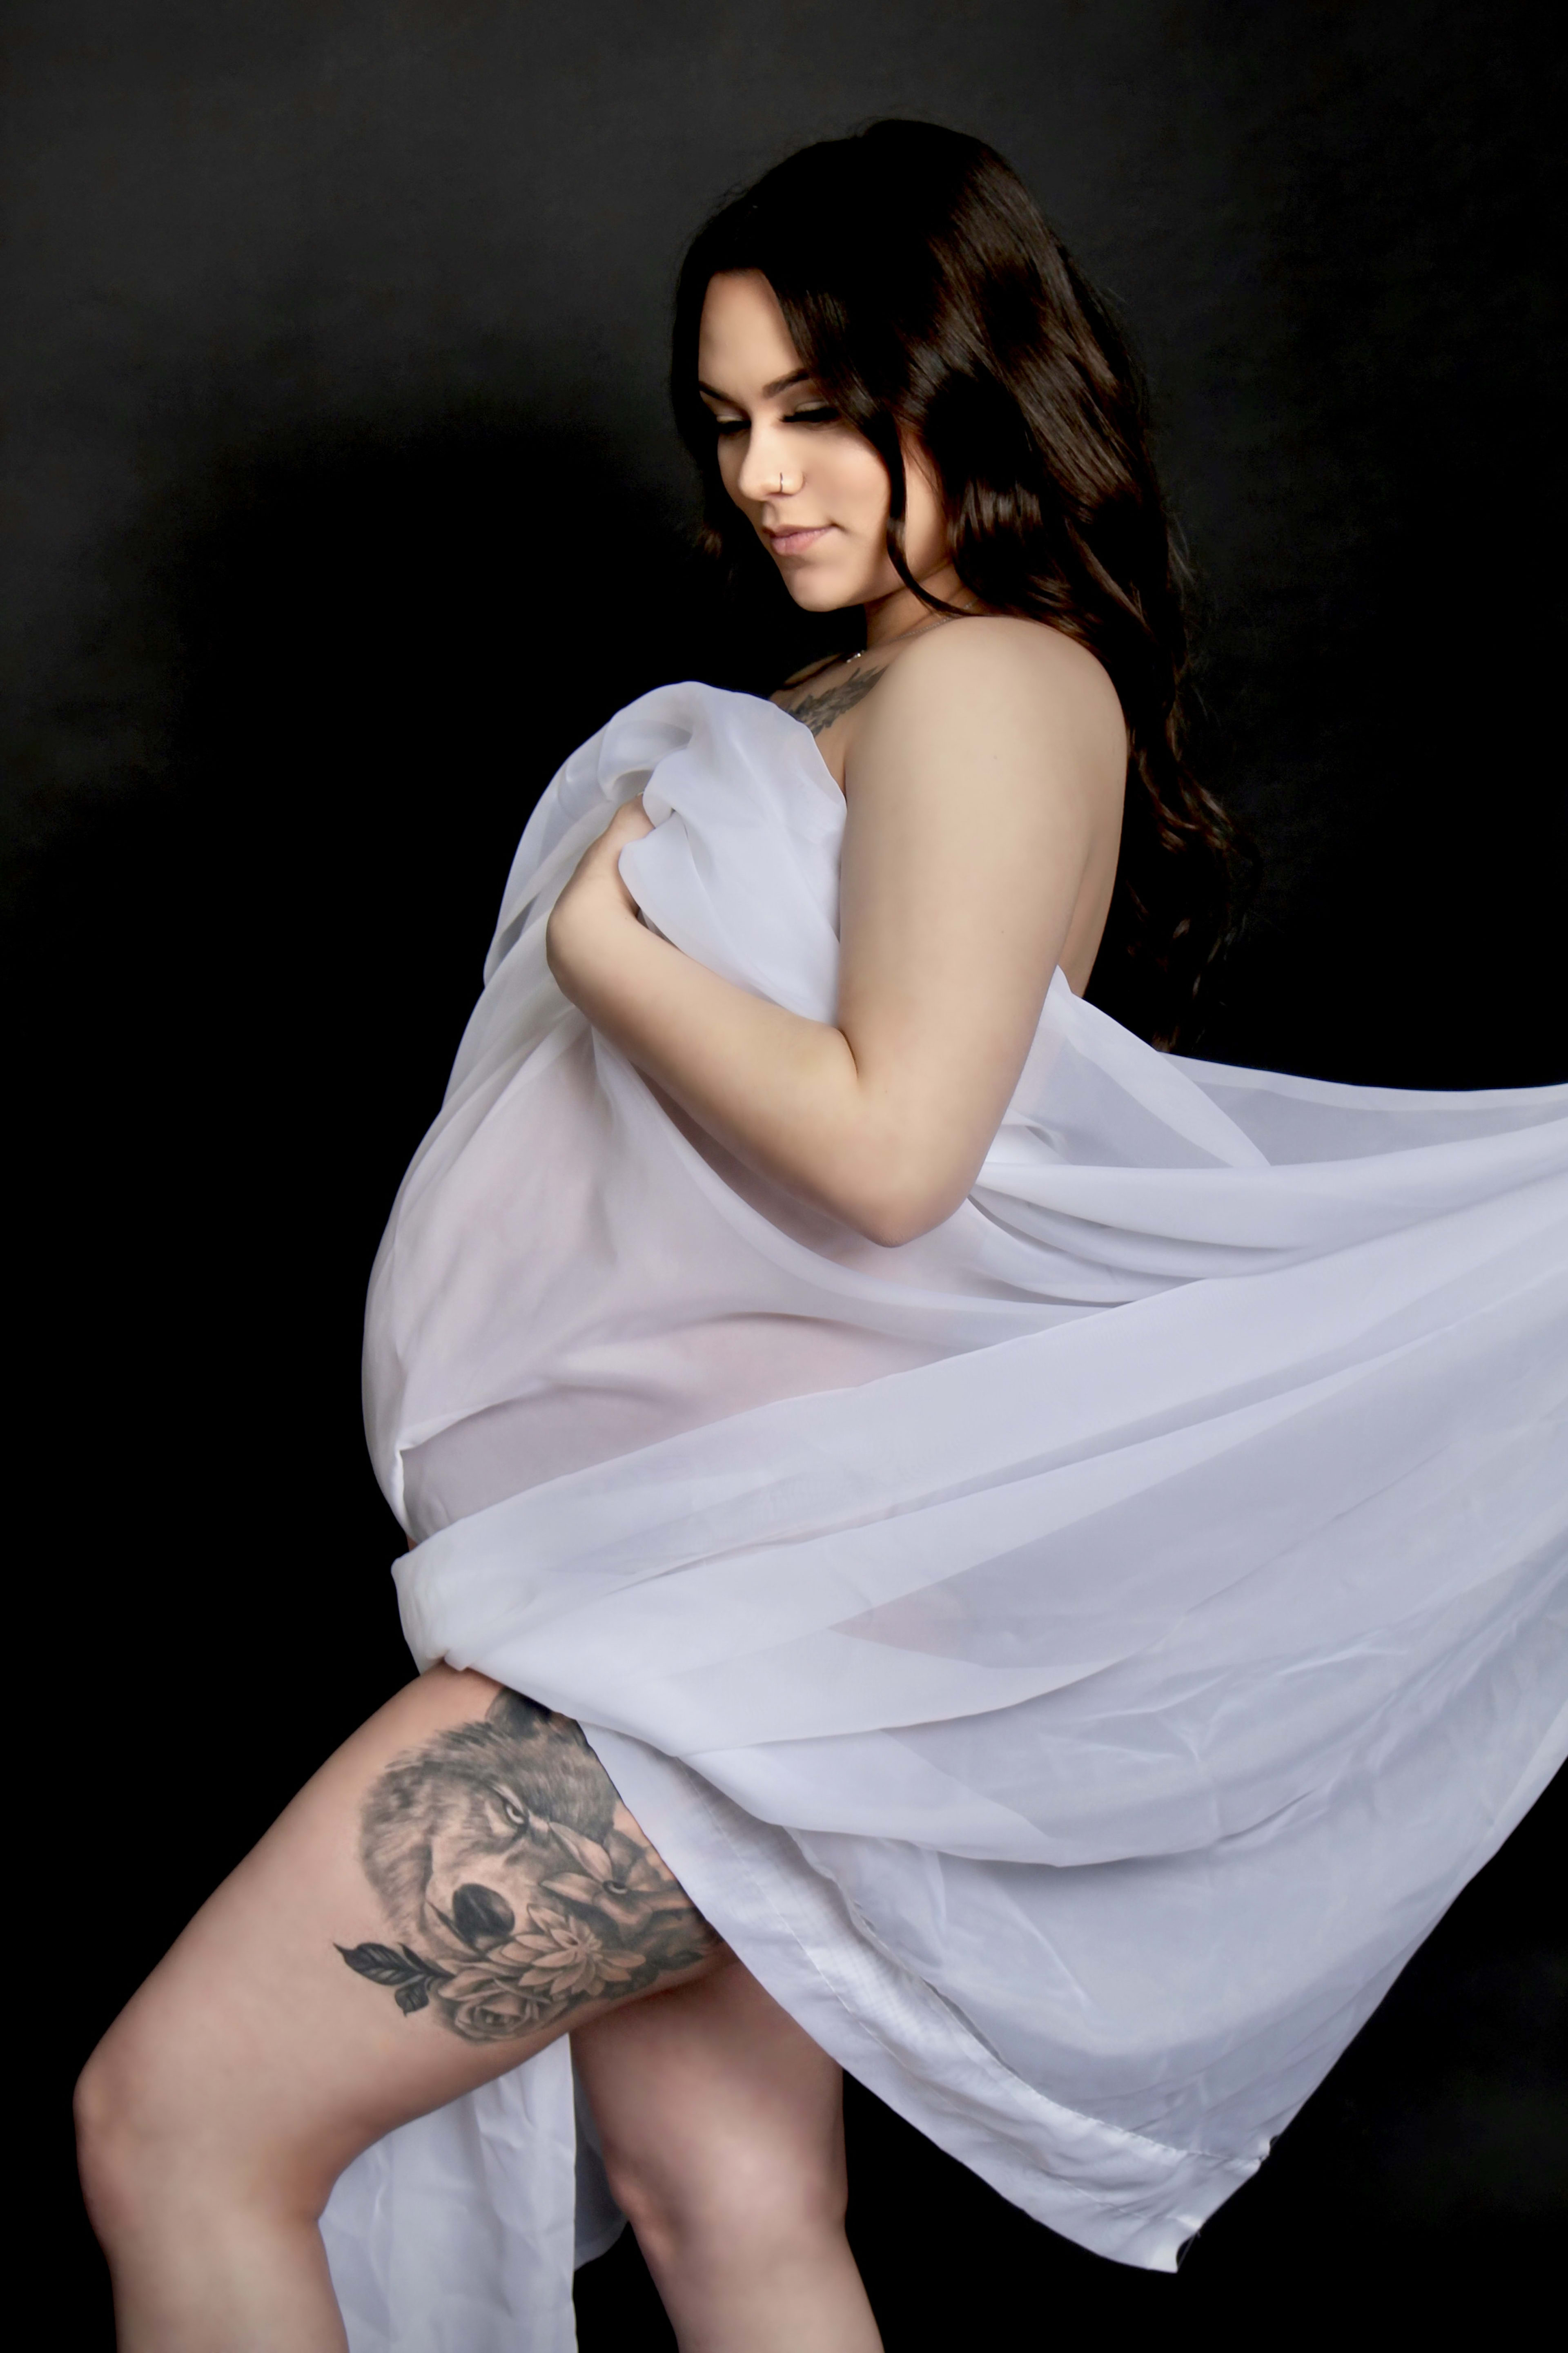 A pregnant woman in a white dress posing for a maternity photoshoot.